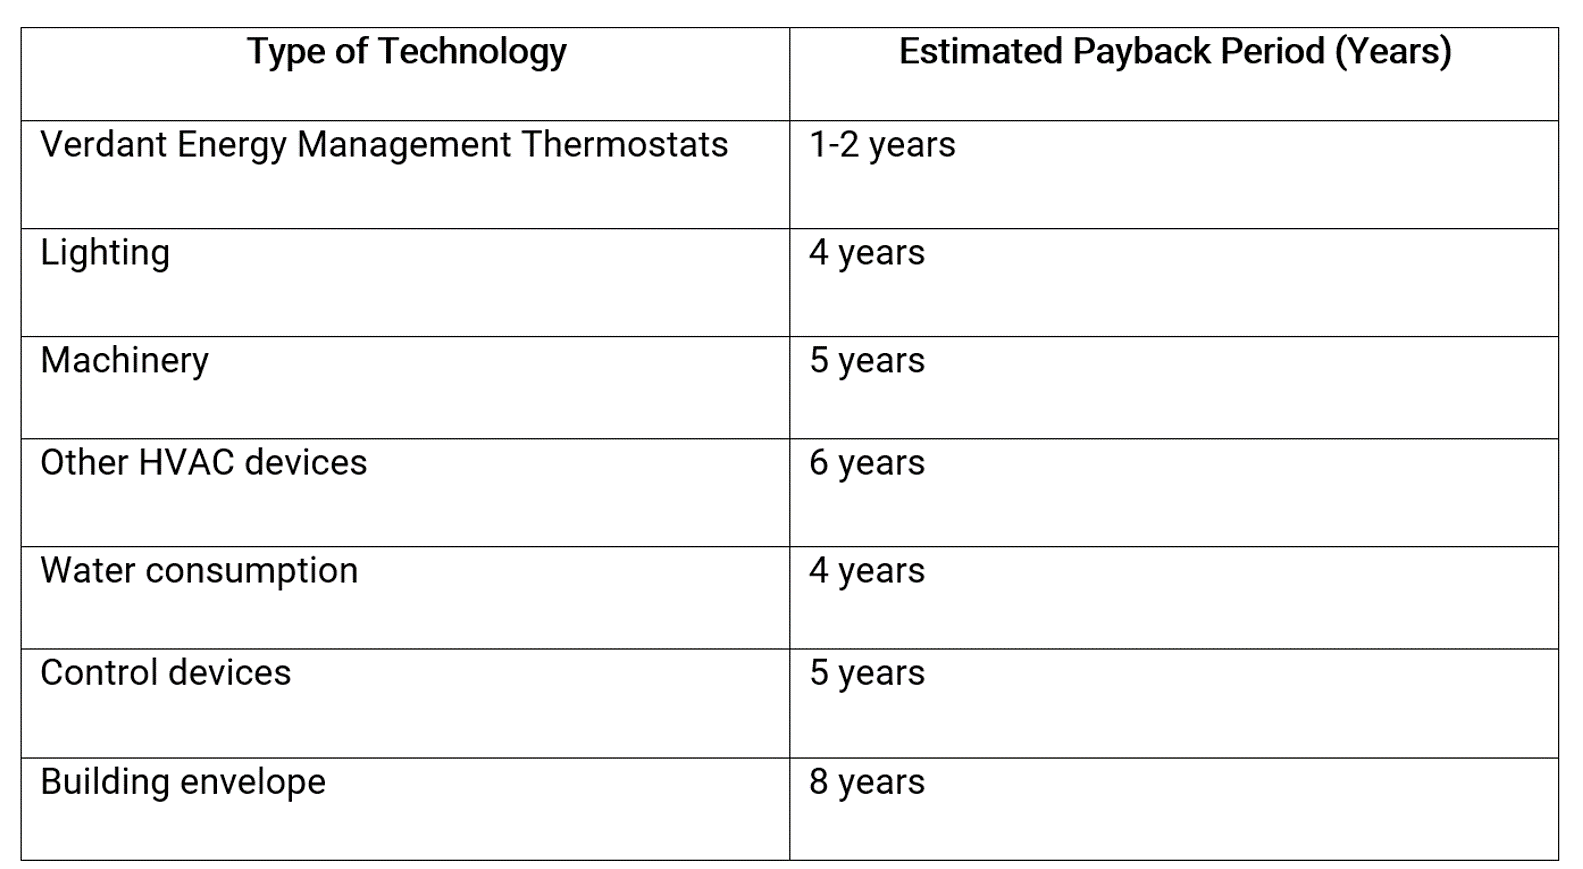 Estimated technology payback periods